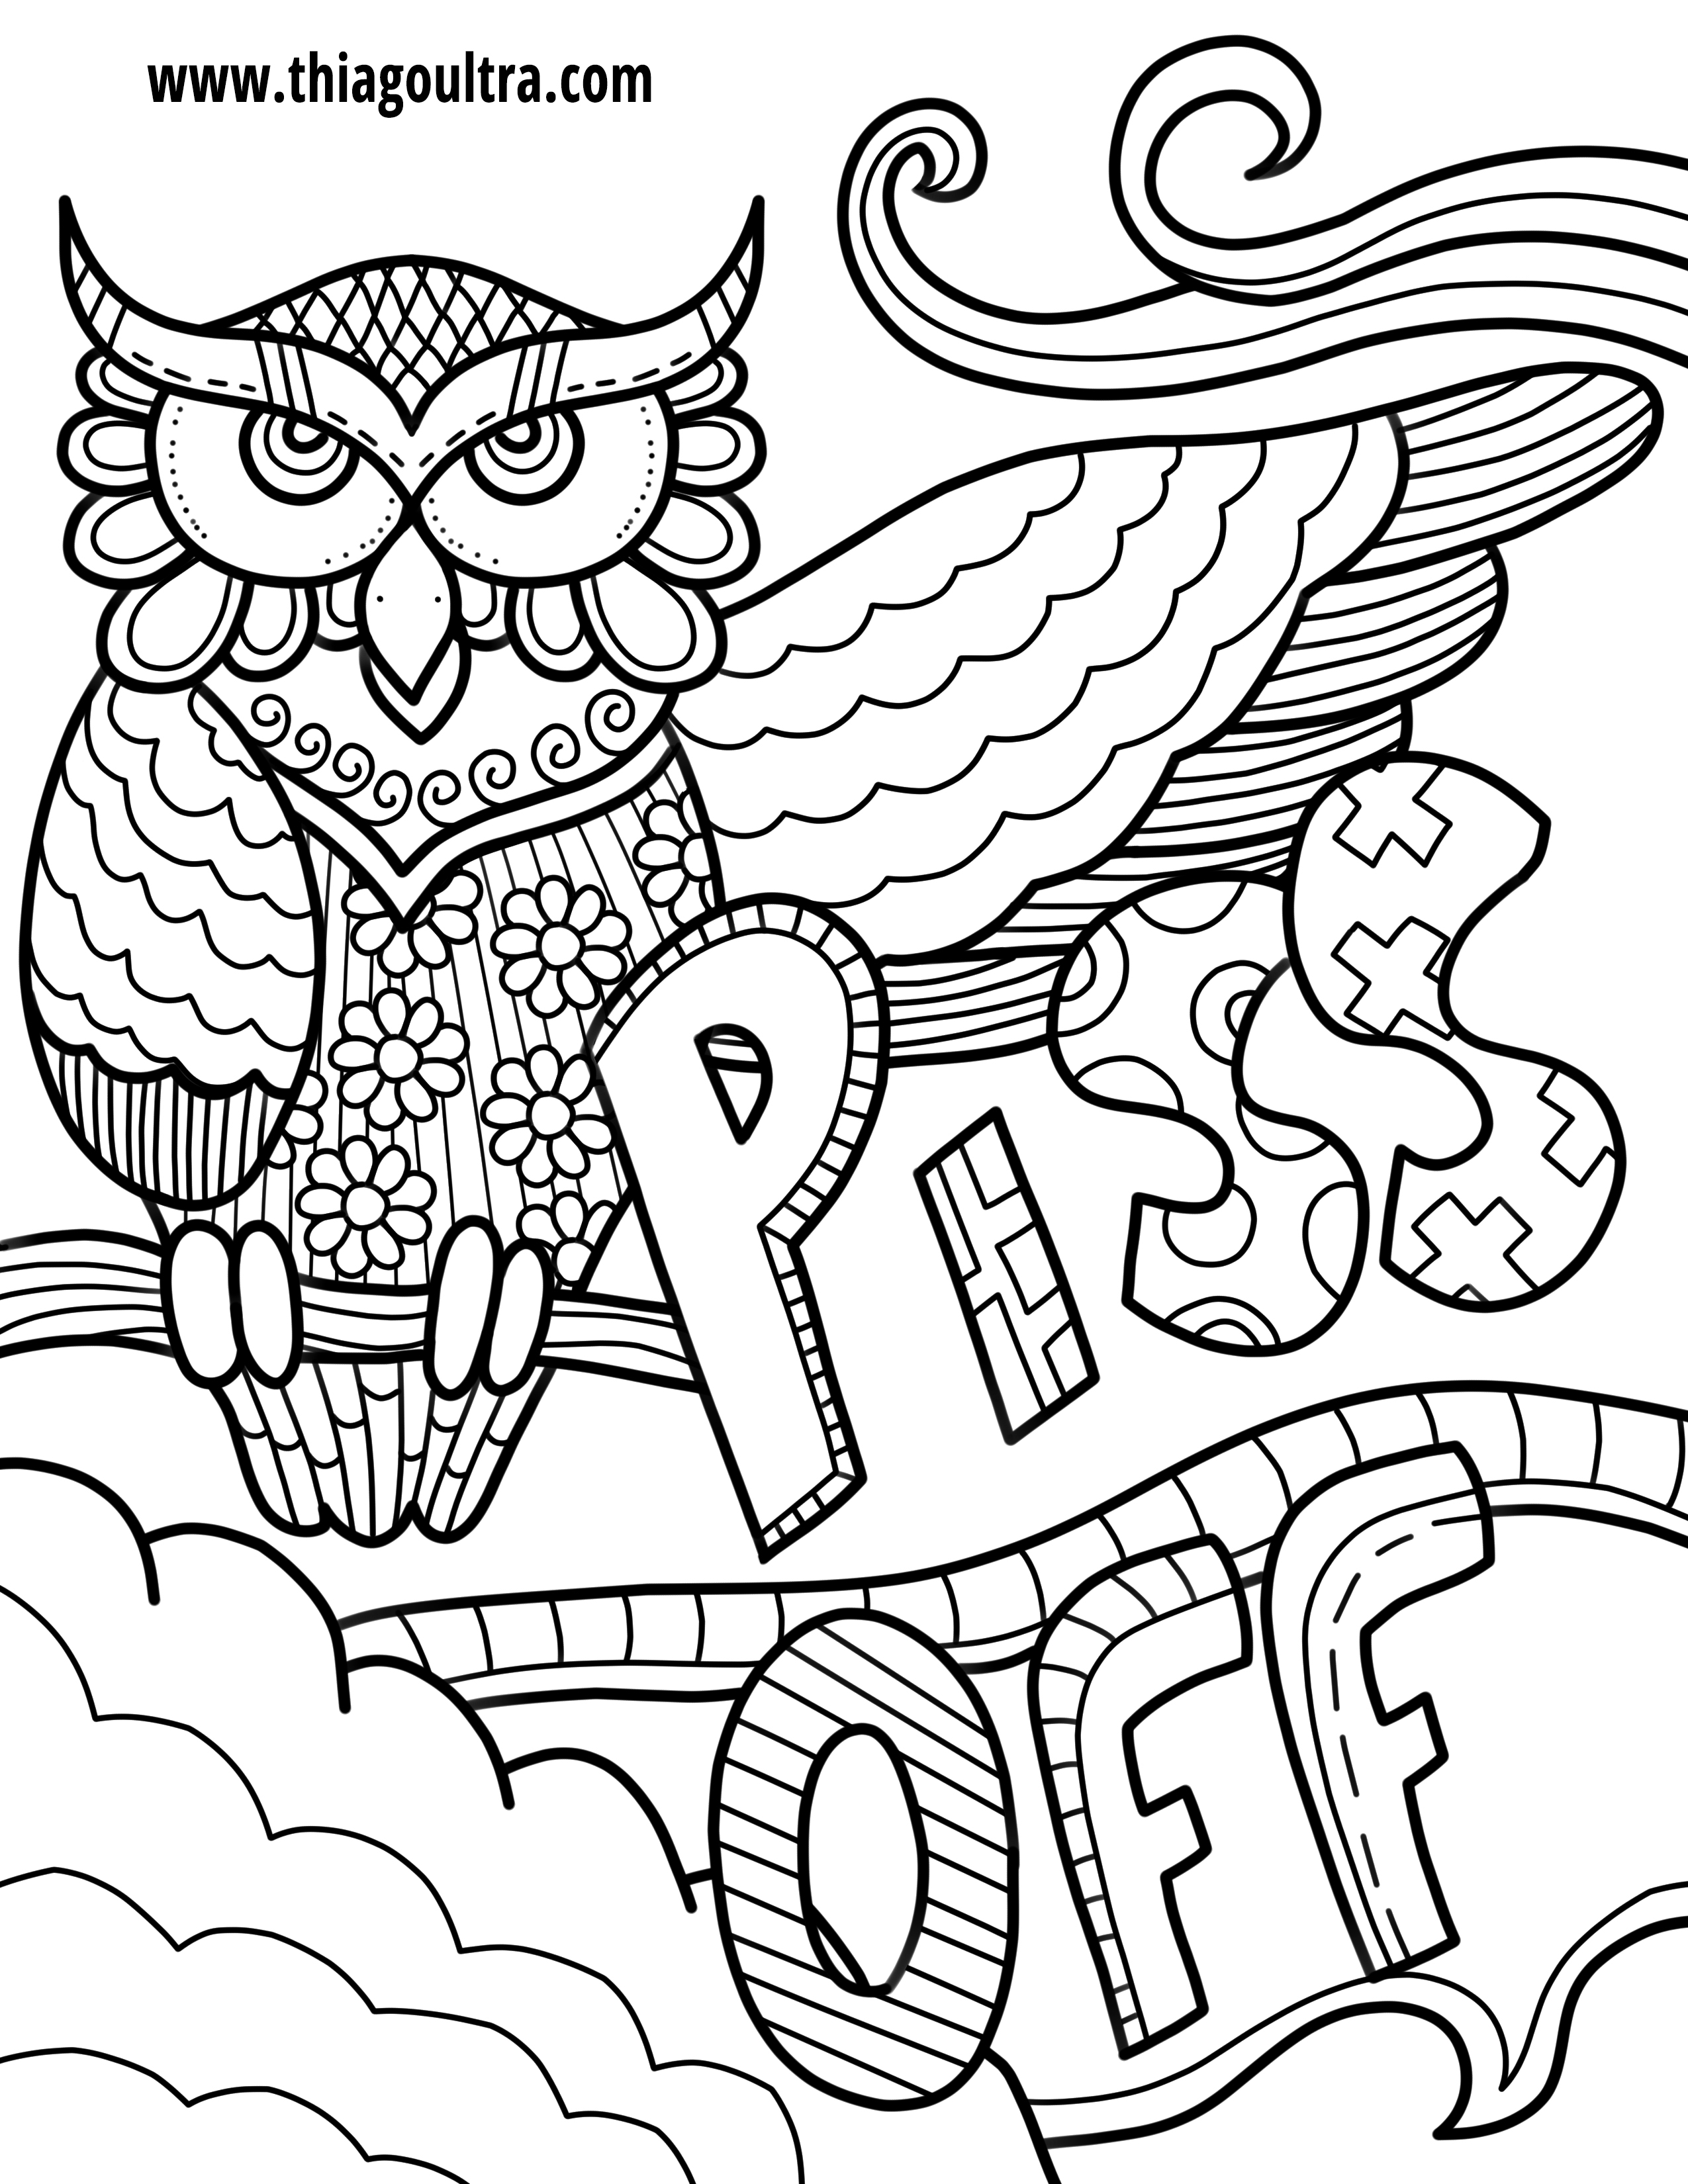 Curse Word Coloring Pages at Free printable